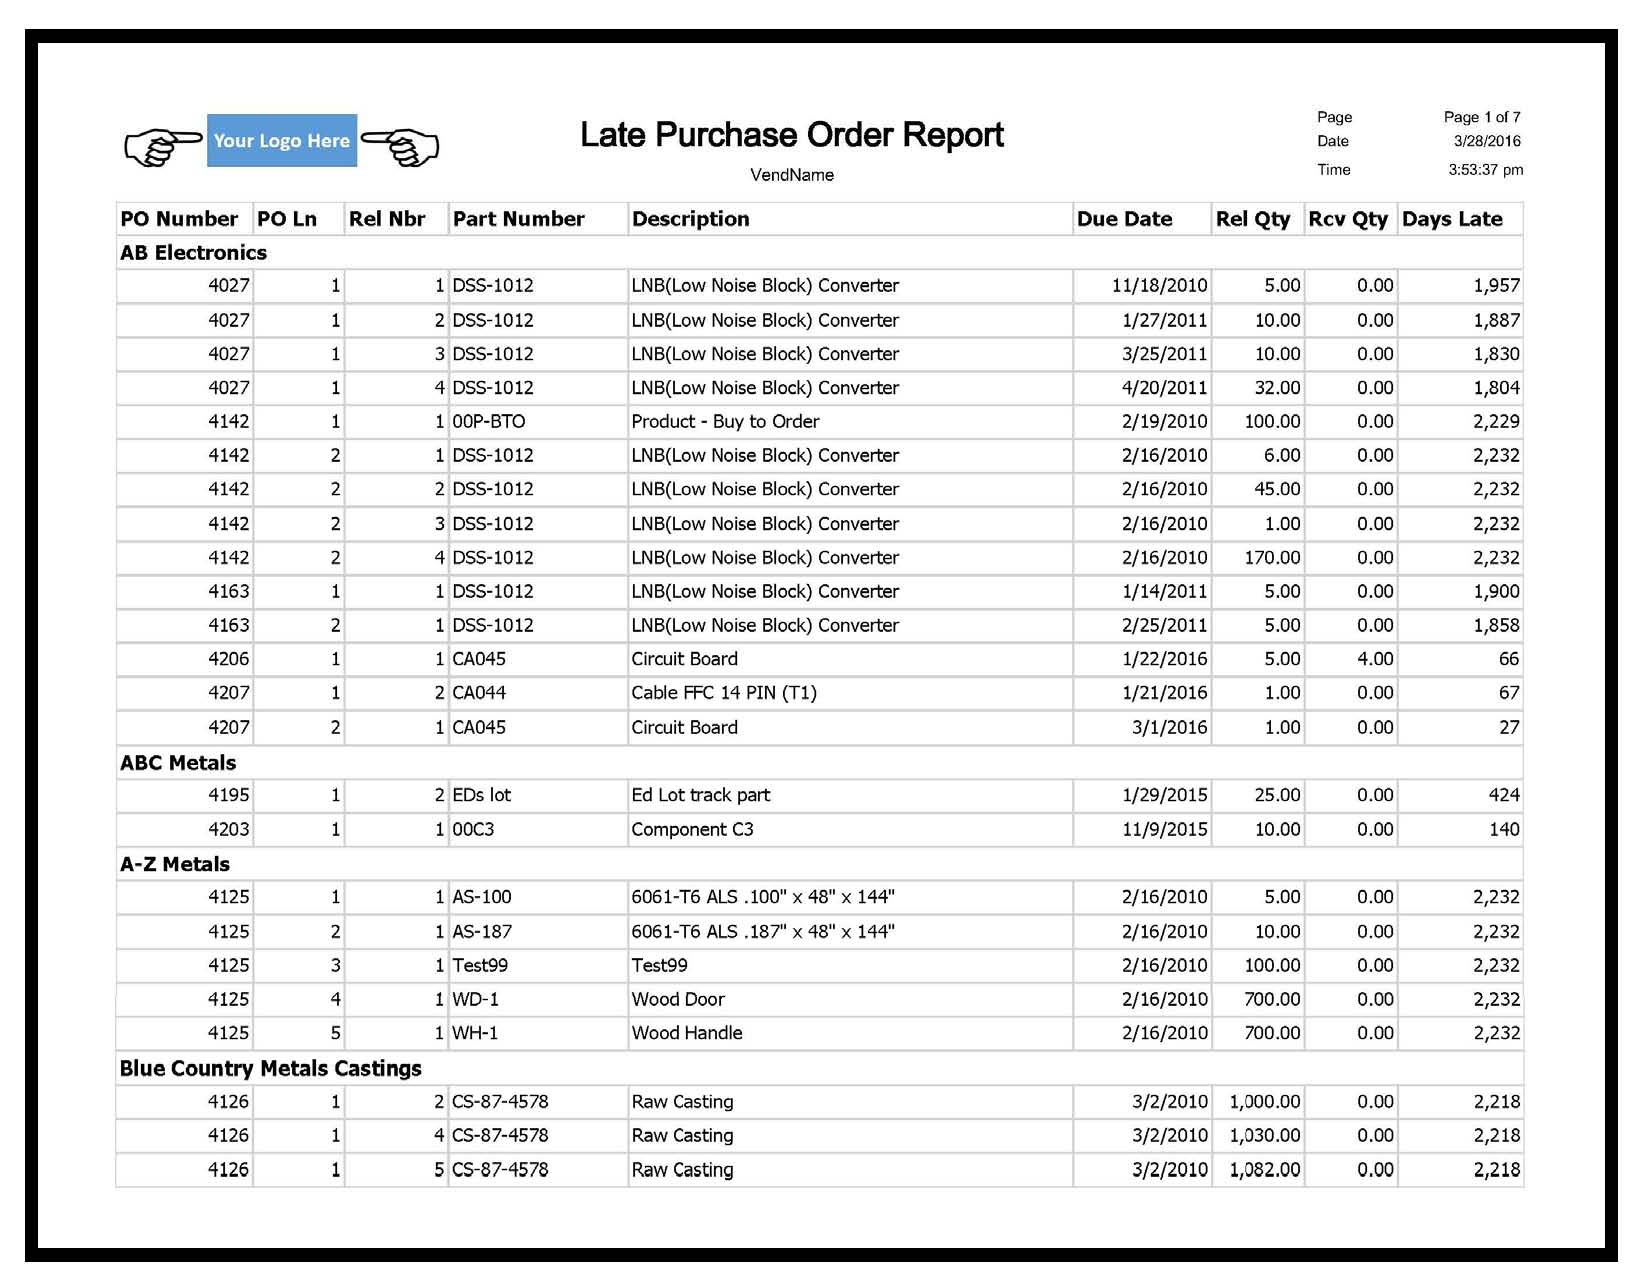 Late Purchase Order Line Analysis-image